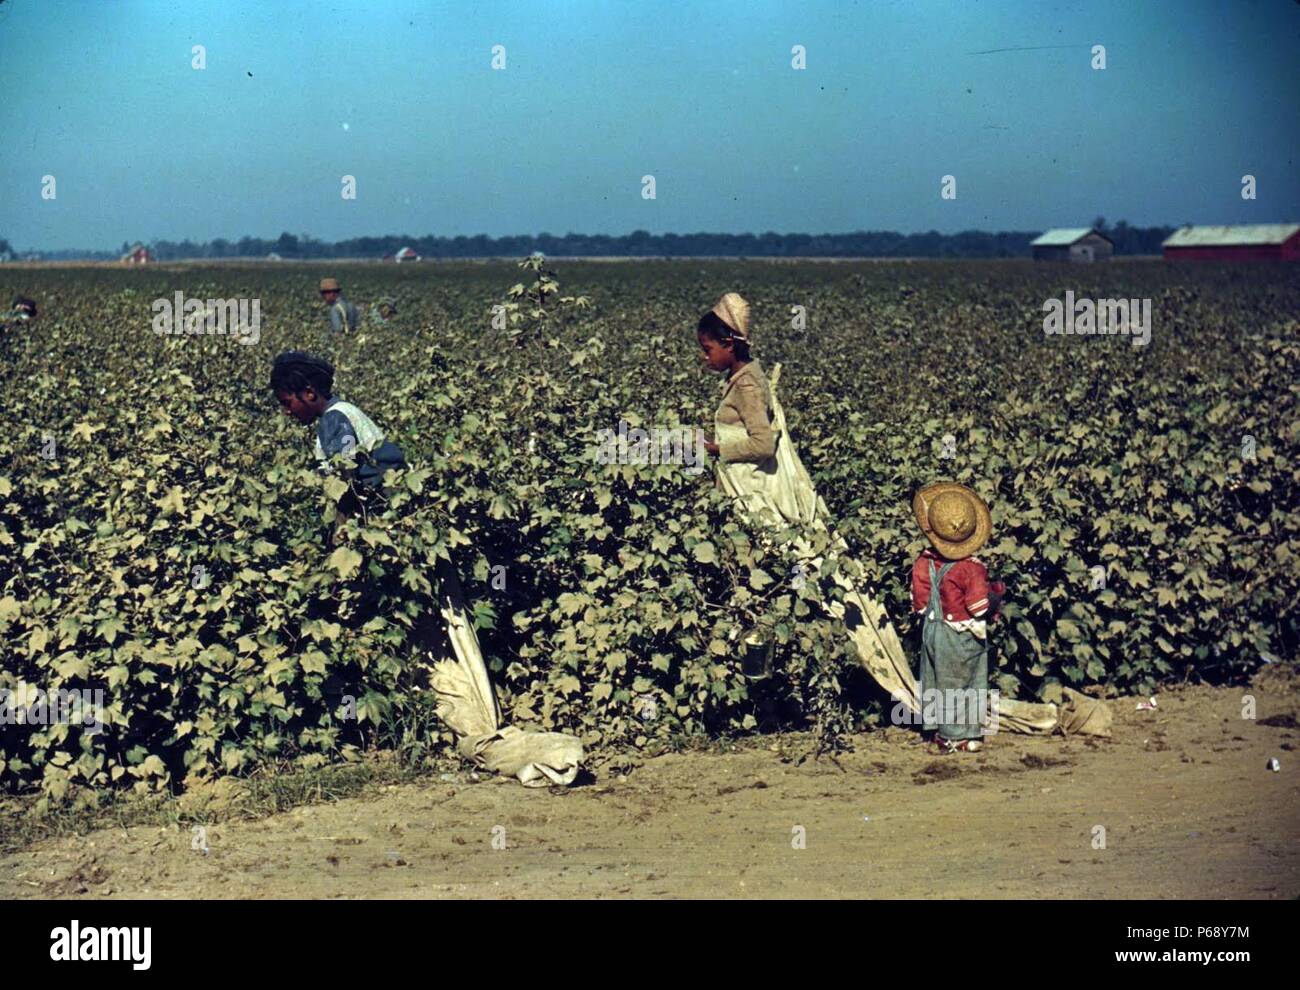 Colour photograph of day labourers picking cotton near Clarksdale, Mississippi Delta. Photographed Marion Post Wolcott (1910-1990) American photographer who worked for the Farm Security Administration during the Great Depression documenting poverty and deprivation. Dated 1940 Stock Photo